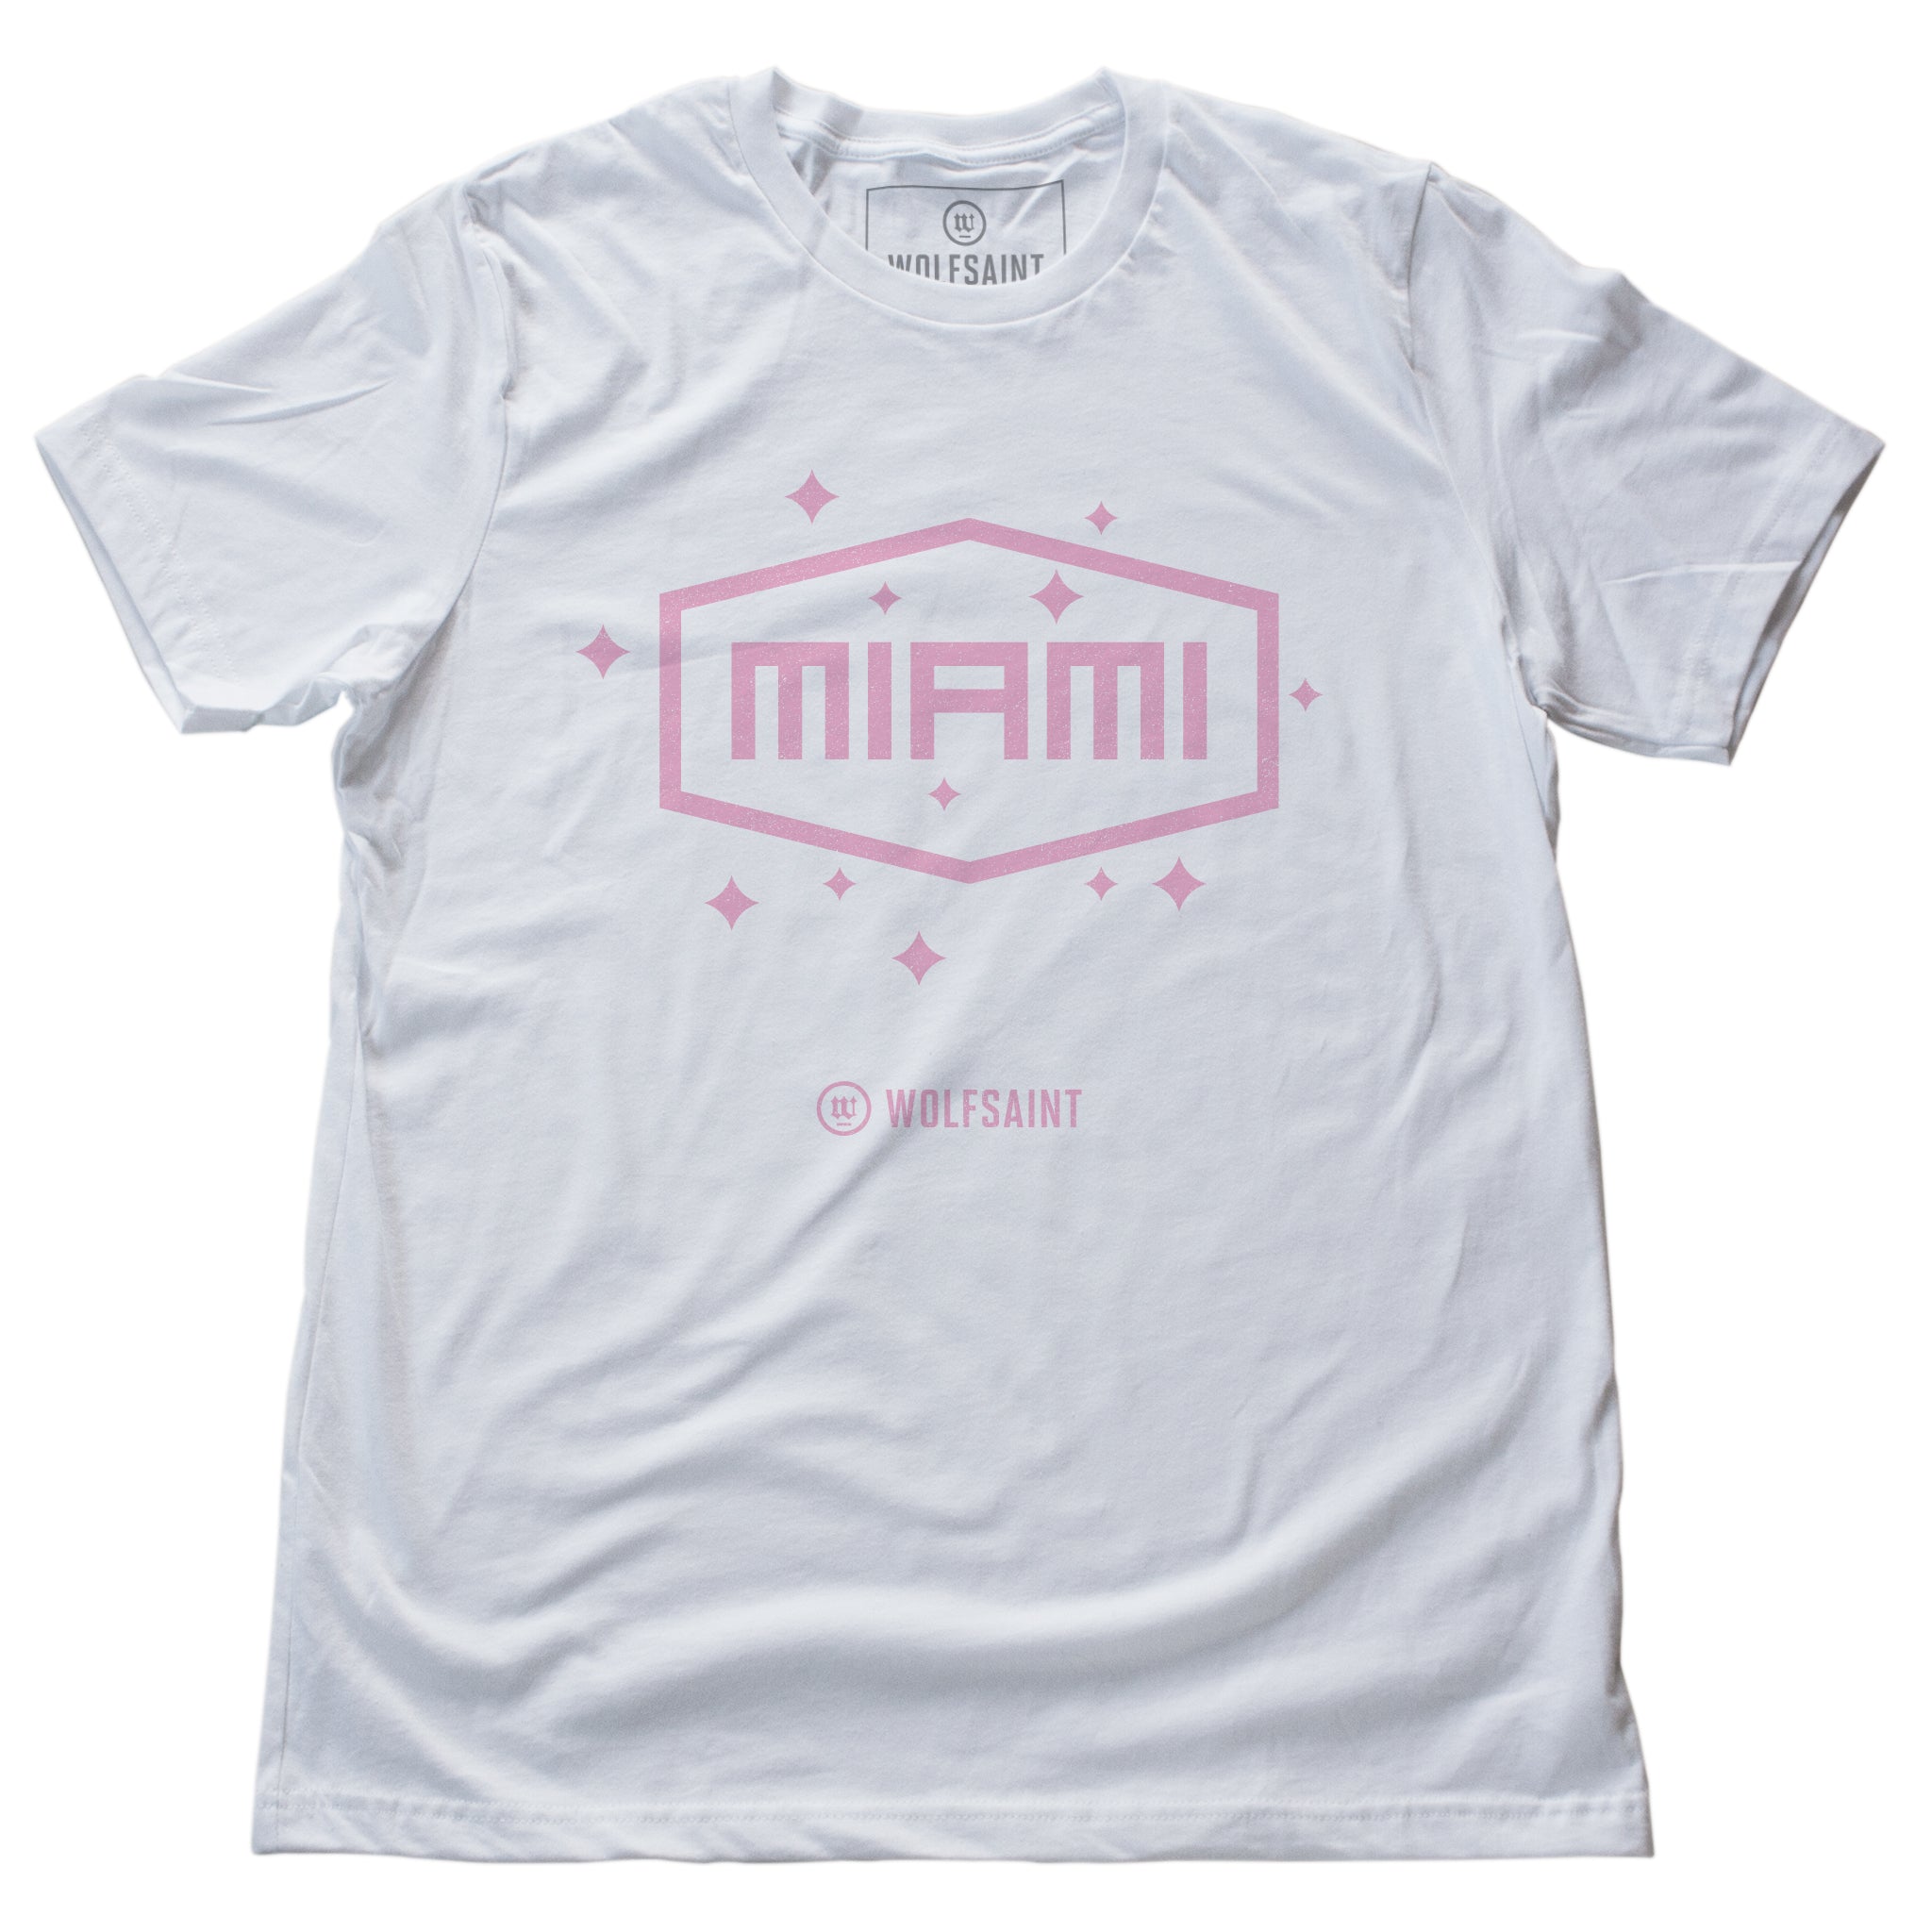 A vintage-inspired, retro fashion t-shirt in clean White, with a simple pale pink “MIAMI” graphic in a field of stars. From wolfsaint.net